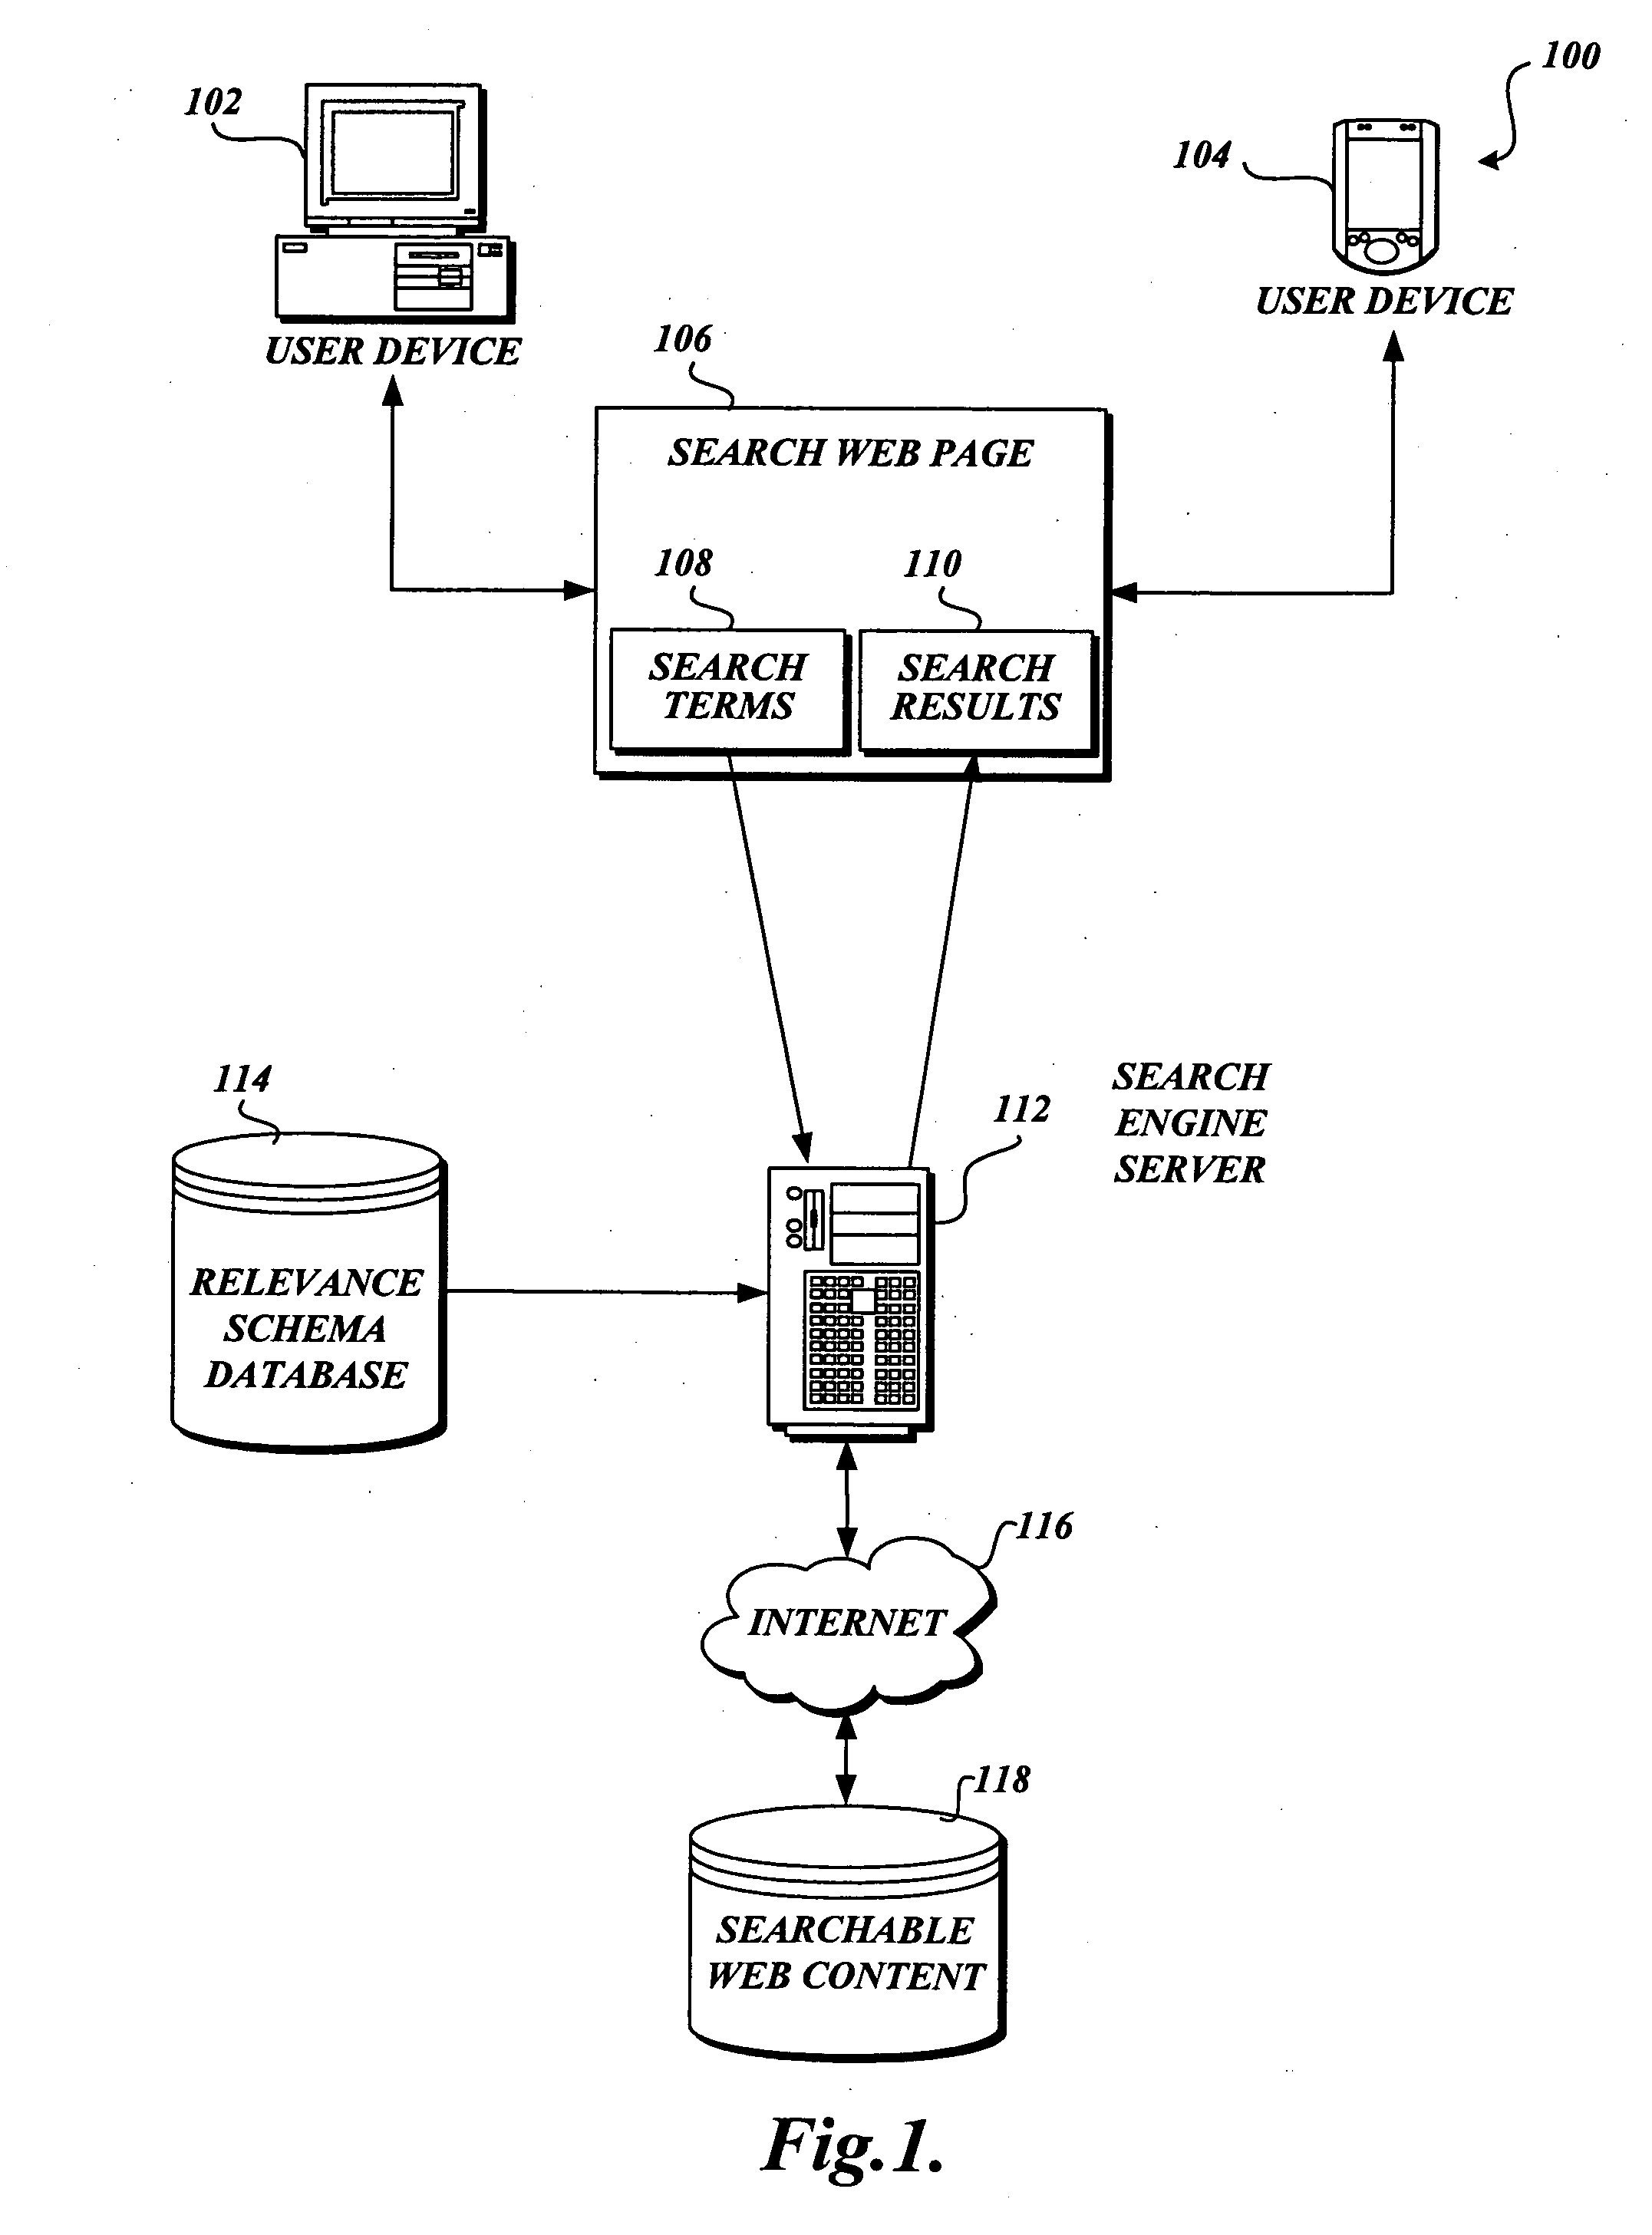 System and method for automated optimization of search result relevance